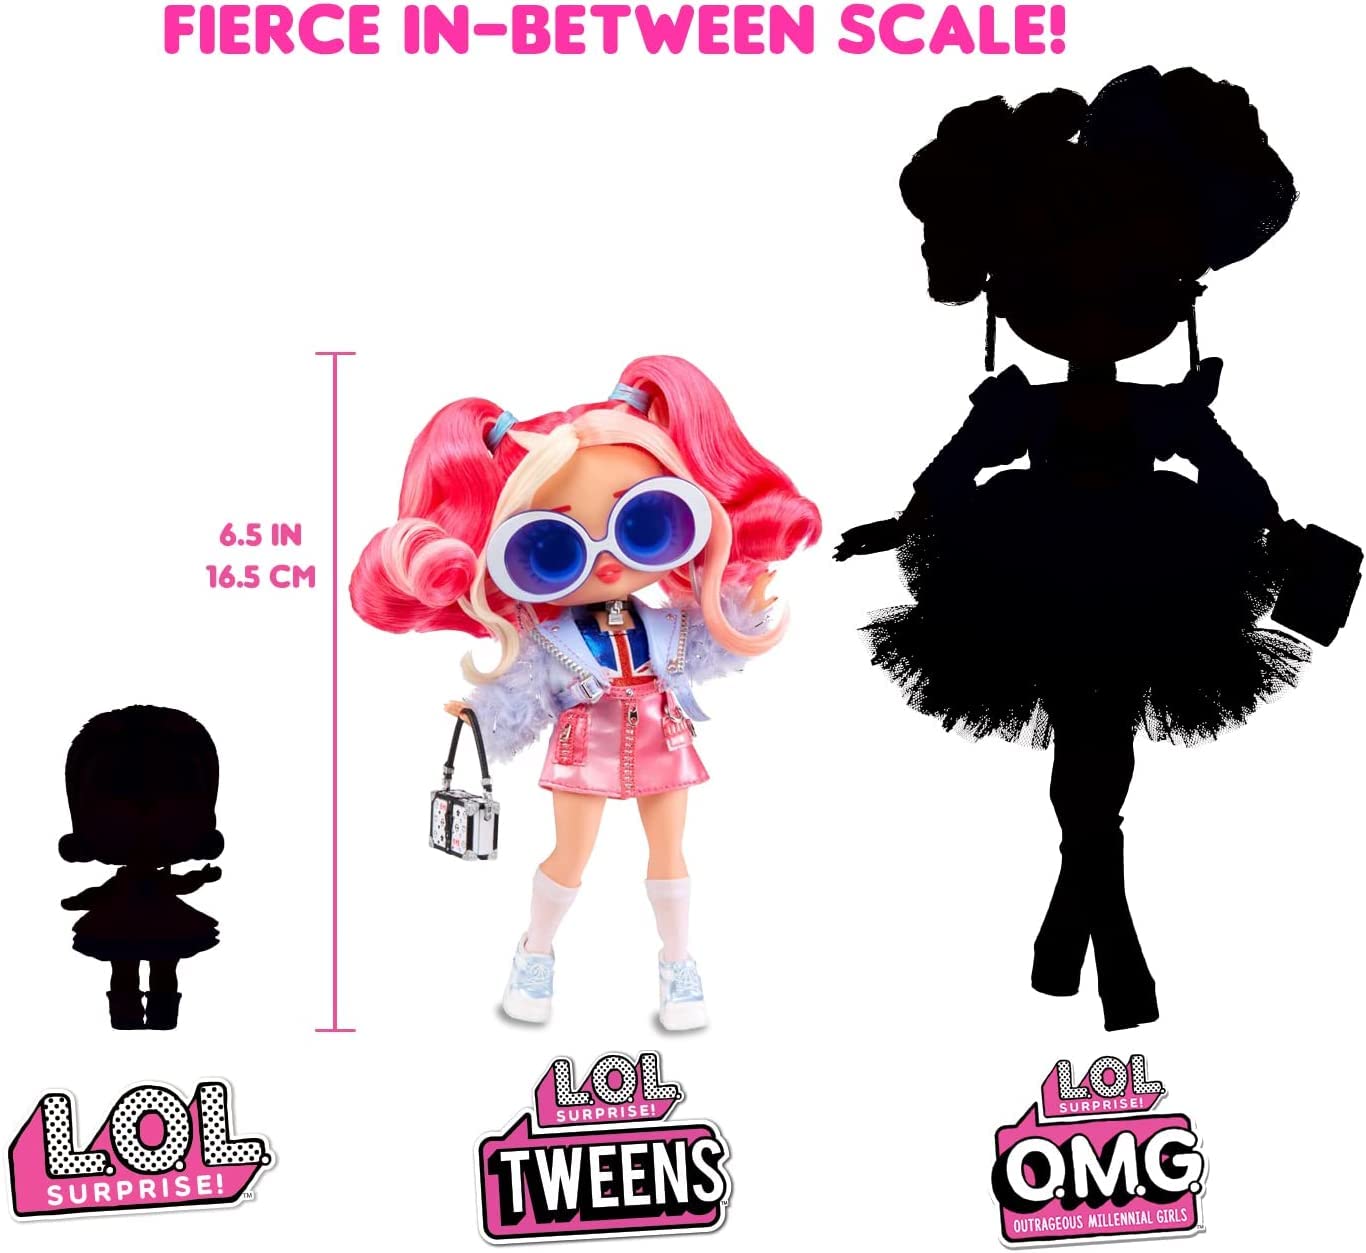 L.O.L. Surprise! Tweens Series 3 Chloe Pepper Fashion Doll with 15 Surprises Including Accessories for Play & Style, Holiday Toy Playset, Great Gift for Kids Girls Boys Ages 4 5 6+ Years Old